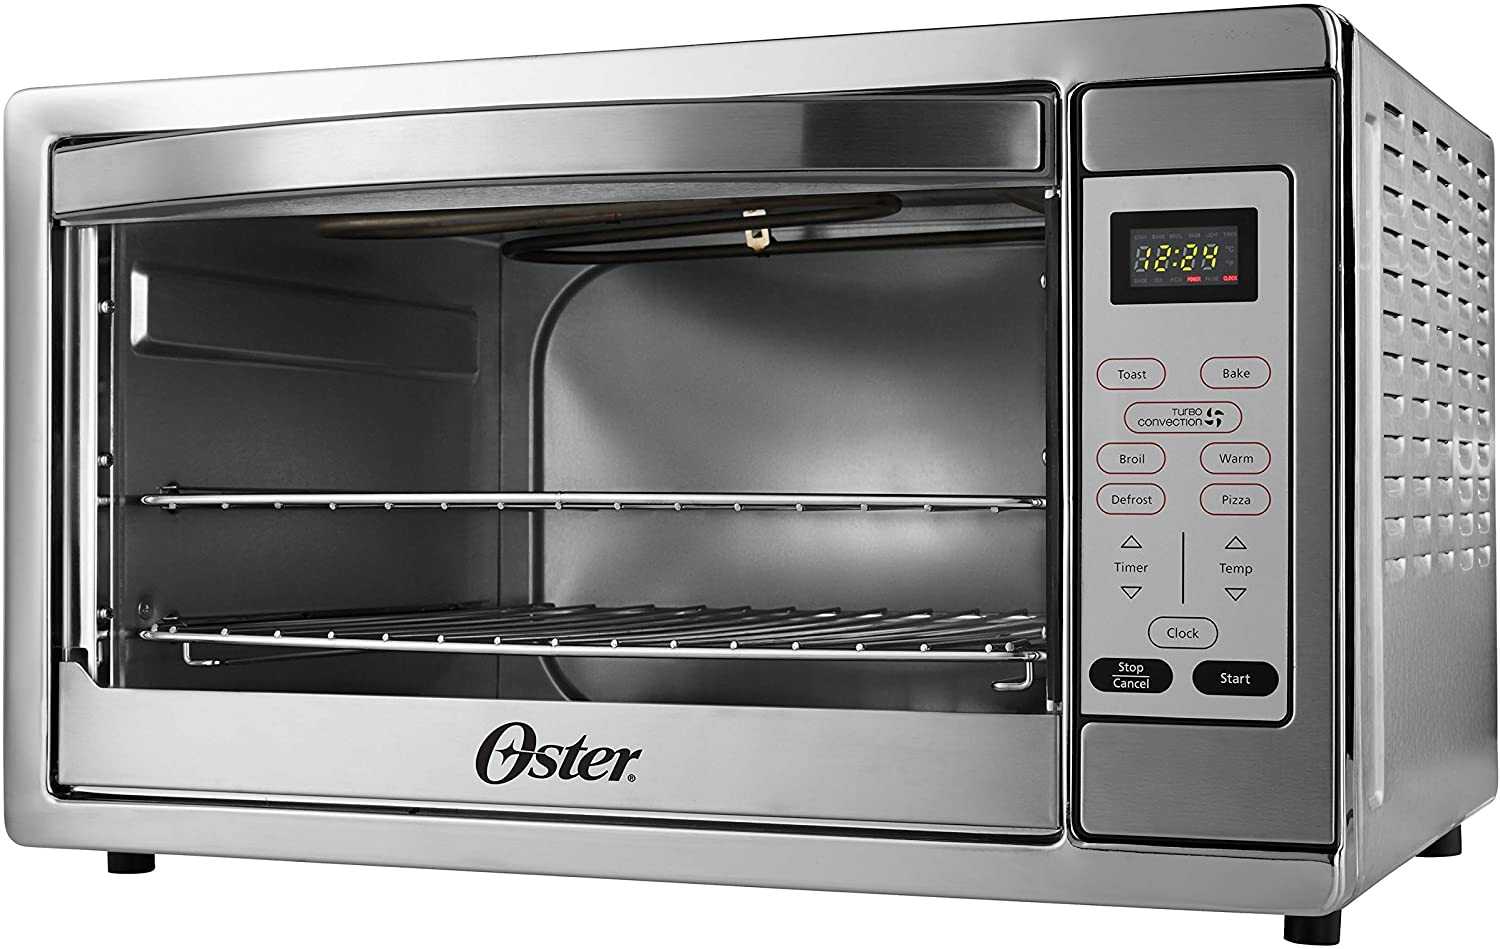 Air Fry vs. Convection: Which Oven Setting is Better? [Bonus: Recipes!], Colder's